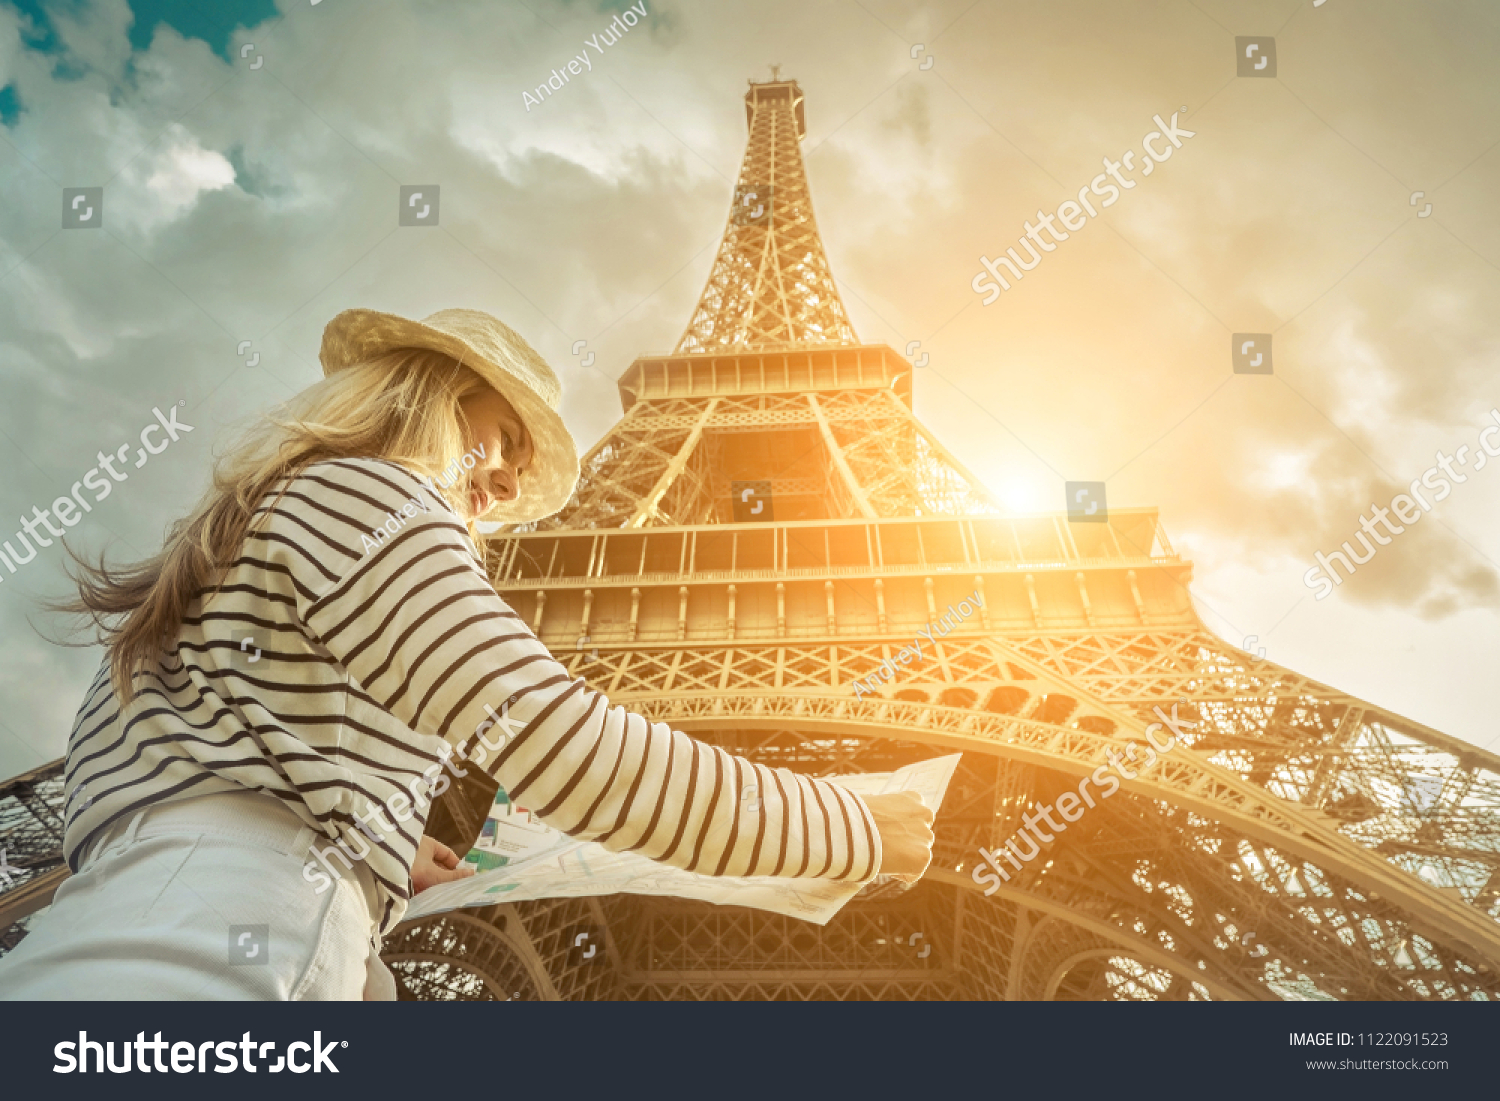 Woman tourist selfie near the Eiffel Tower in Paris under sunlight and blue sky. Famous popular touristic place in the world. #1122091523